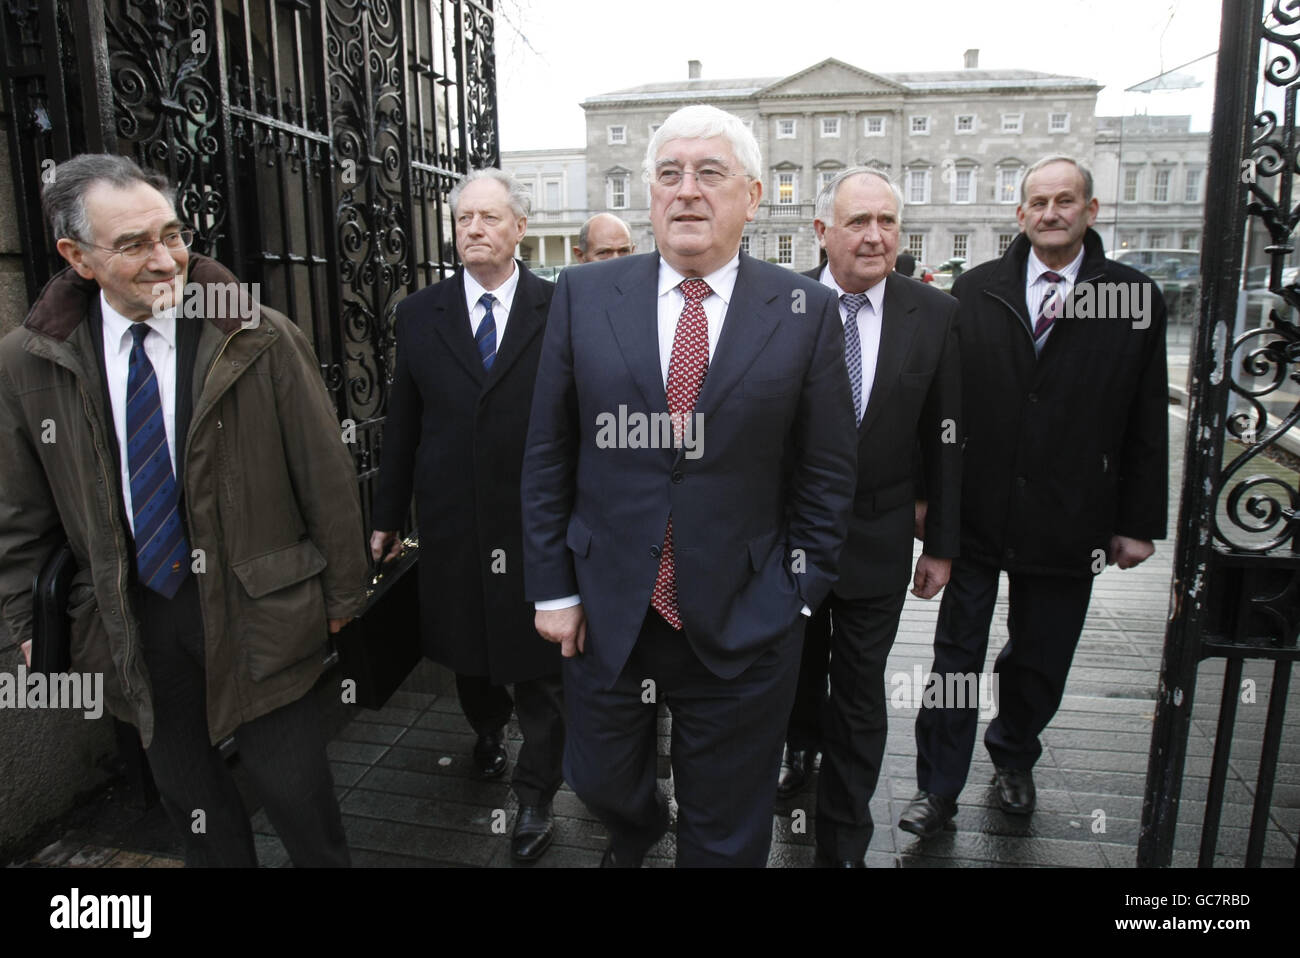 (left to right) The Royal Black Institutions, Grand Registrar William Scott, Sovereign Grand Master Millar Farr, Grand Treasurer William Abernethy, Education Minister Batt O'Keefe, County Grand Master of Cavan William Roberts and County Grand Master of Monaghan Eric Mackerel leaving Leinster House after discussions about the withdrawal of Government funding to protestant schools. Stock Photo